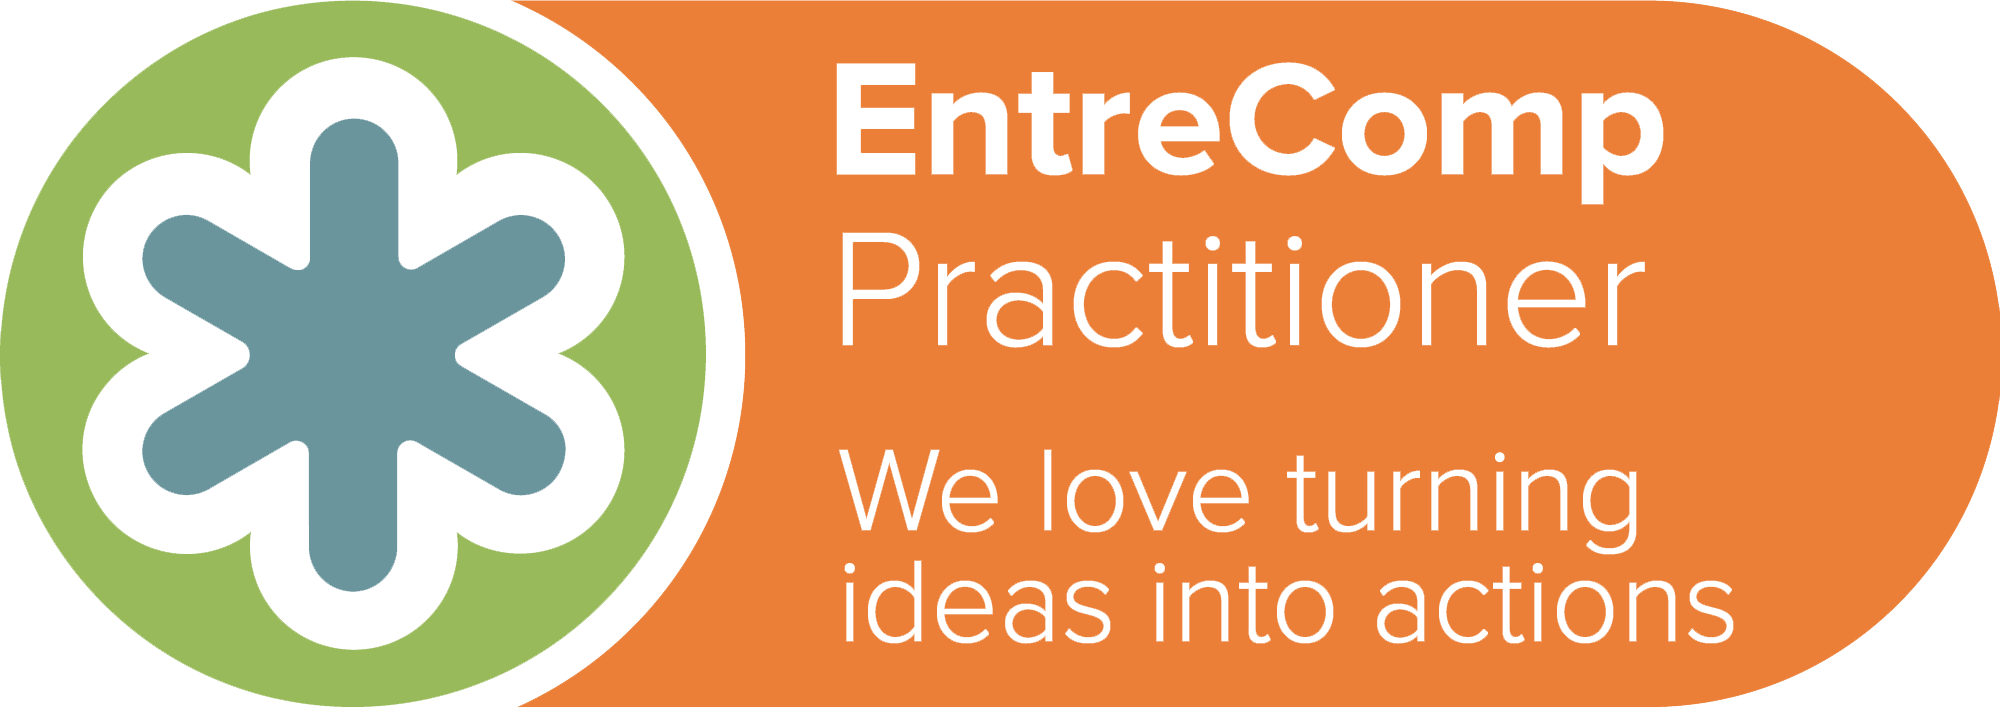 EntreComp Practitioner - We love turning ideas intro actions